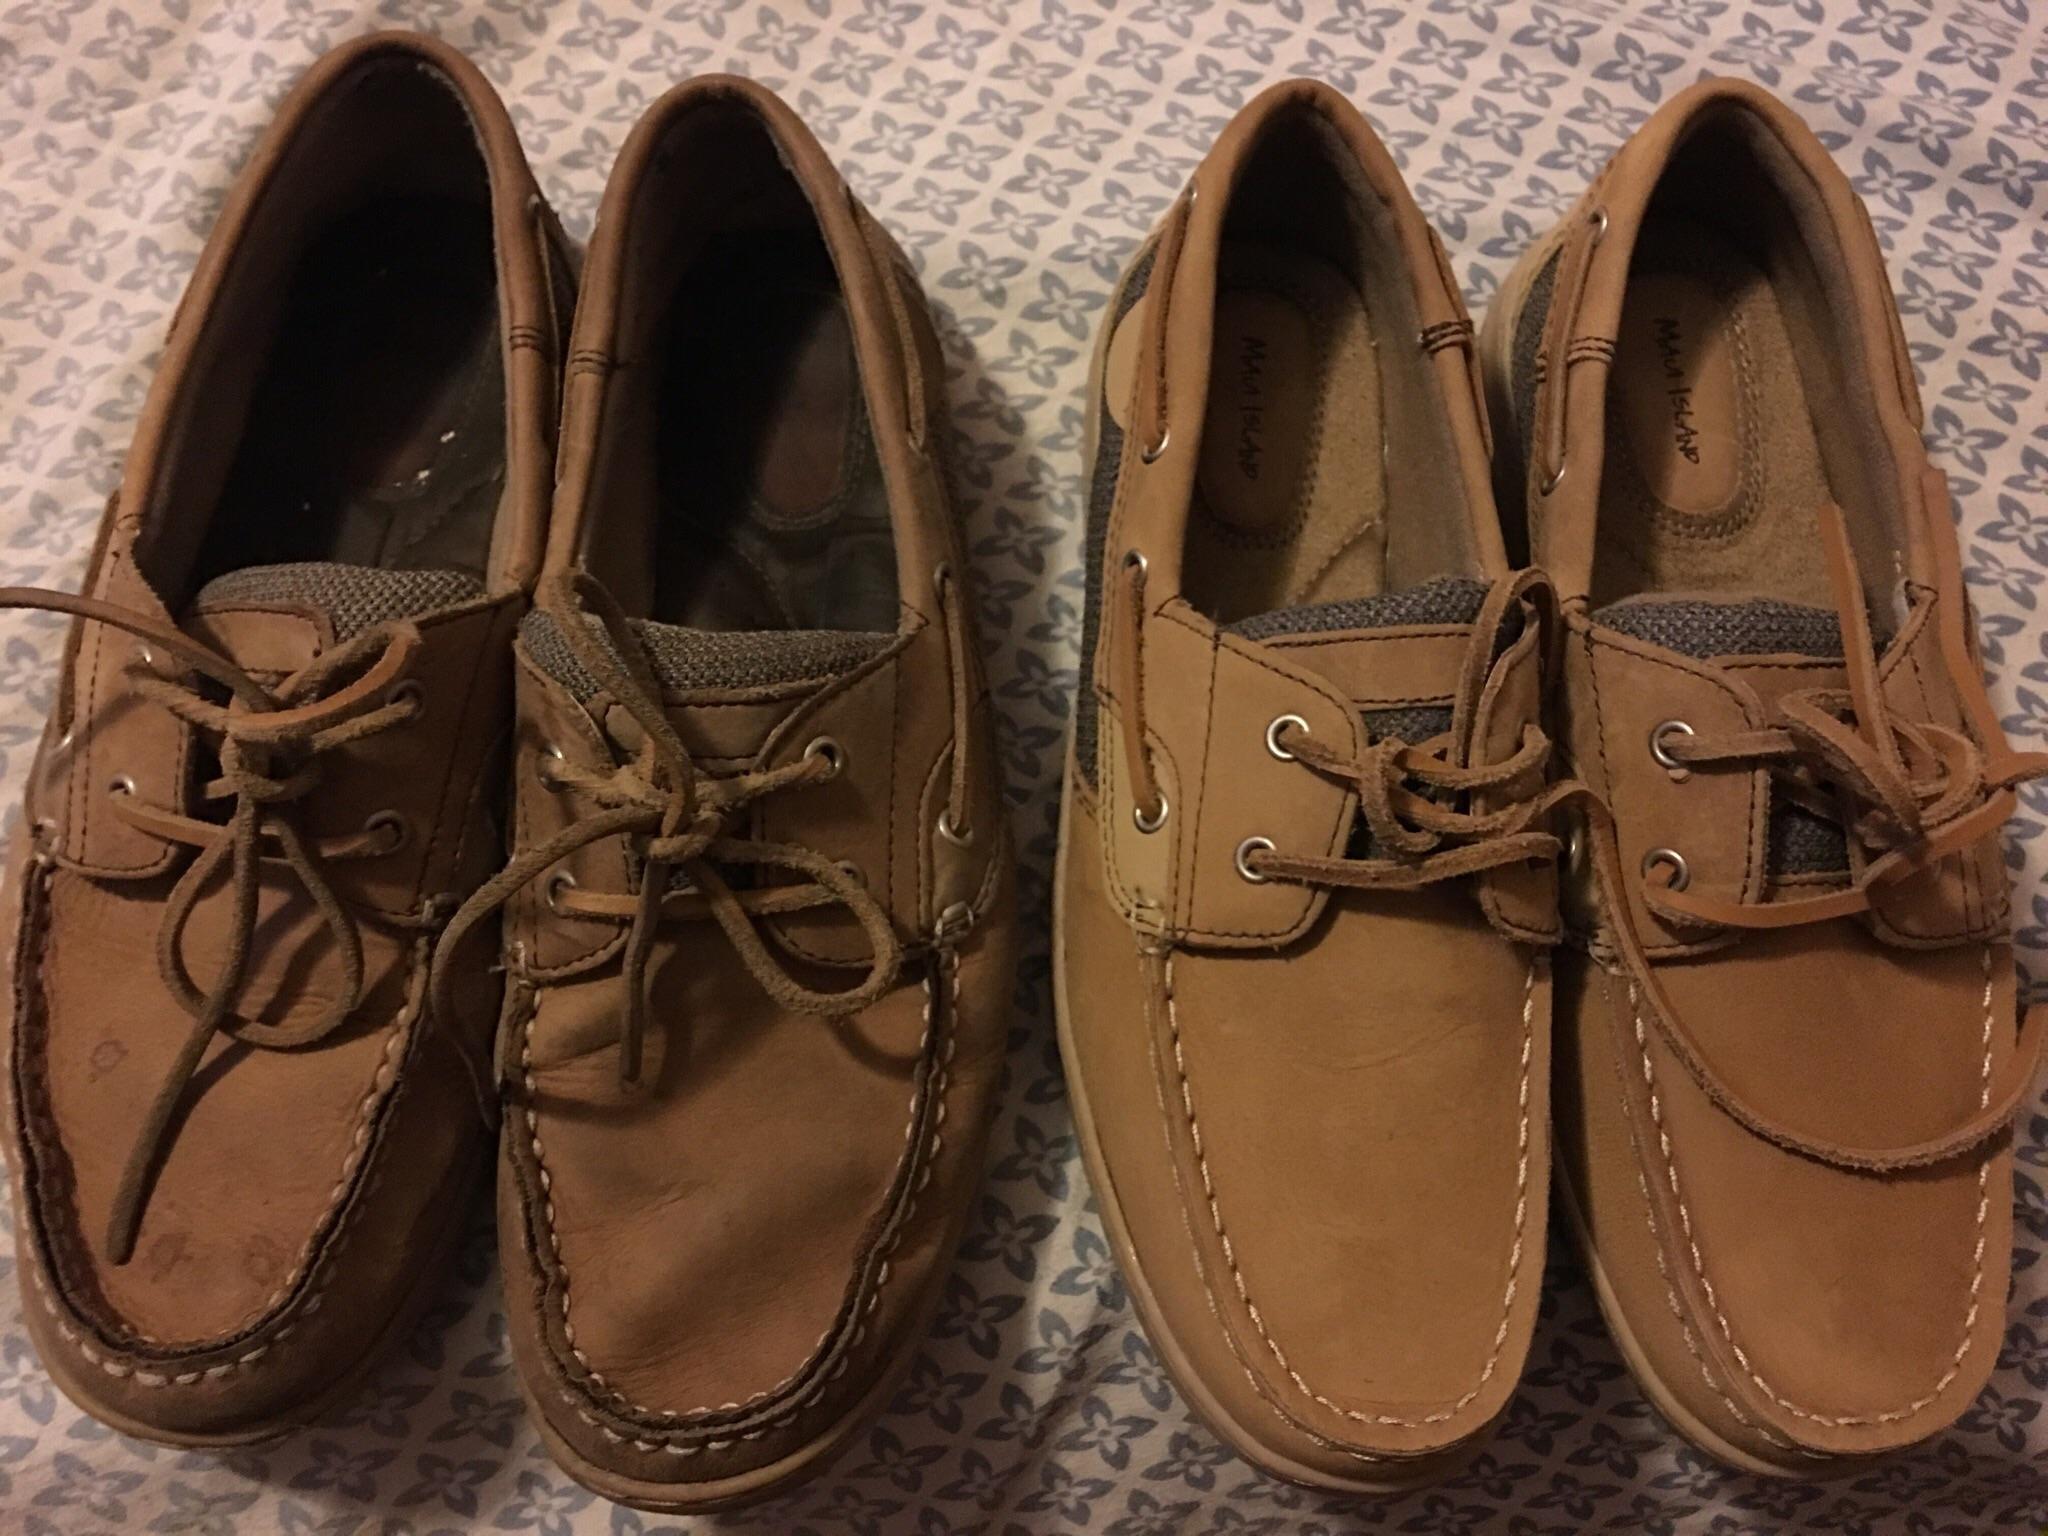 old shoes (5 years old) vs. new shoes : Wellworn